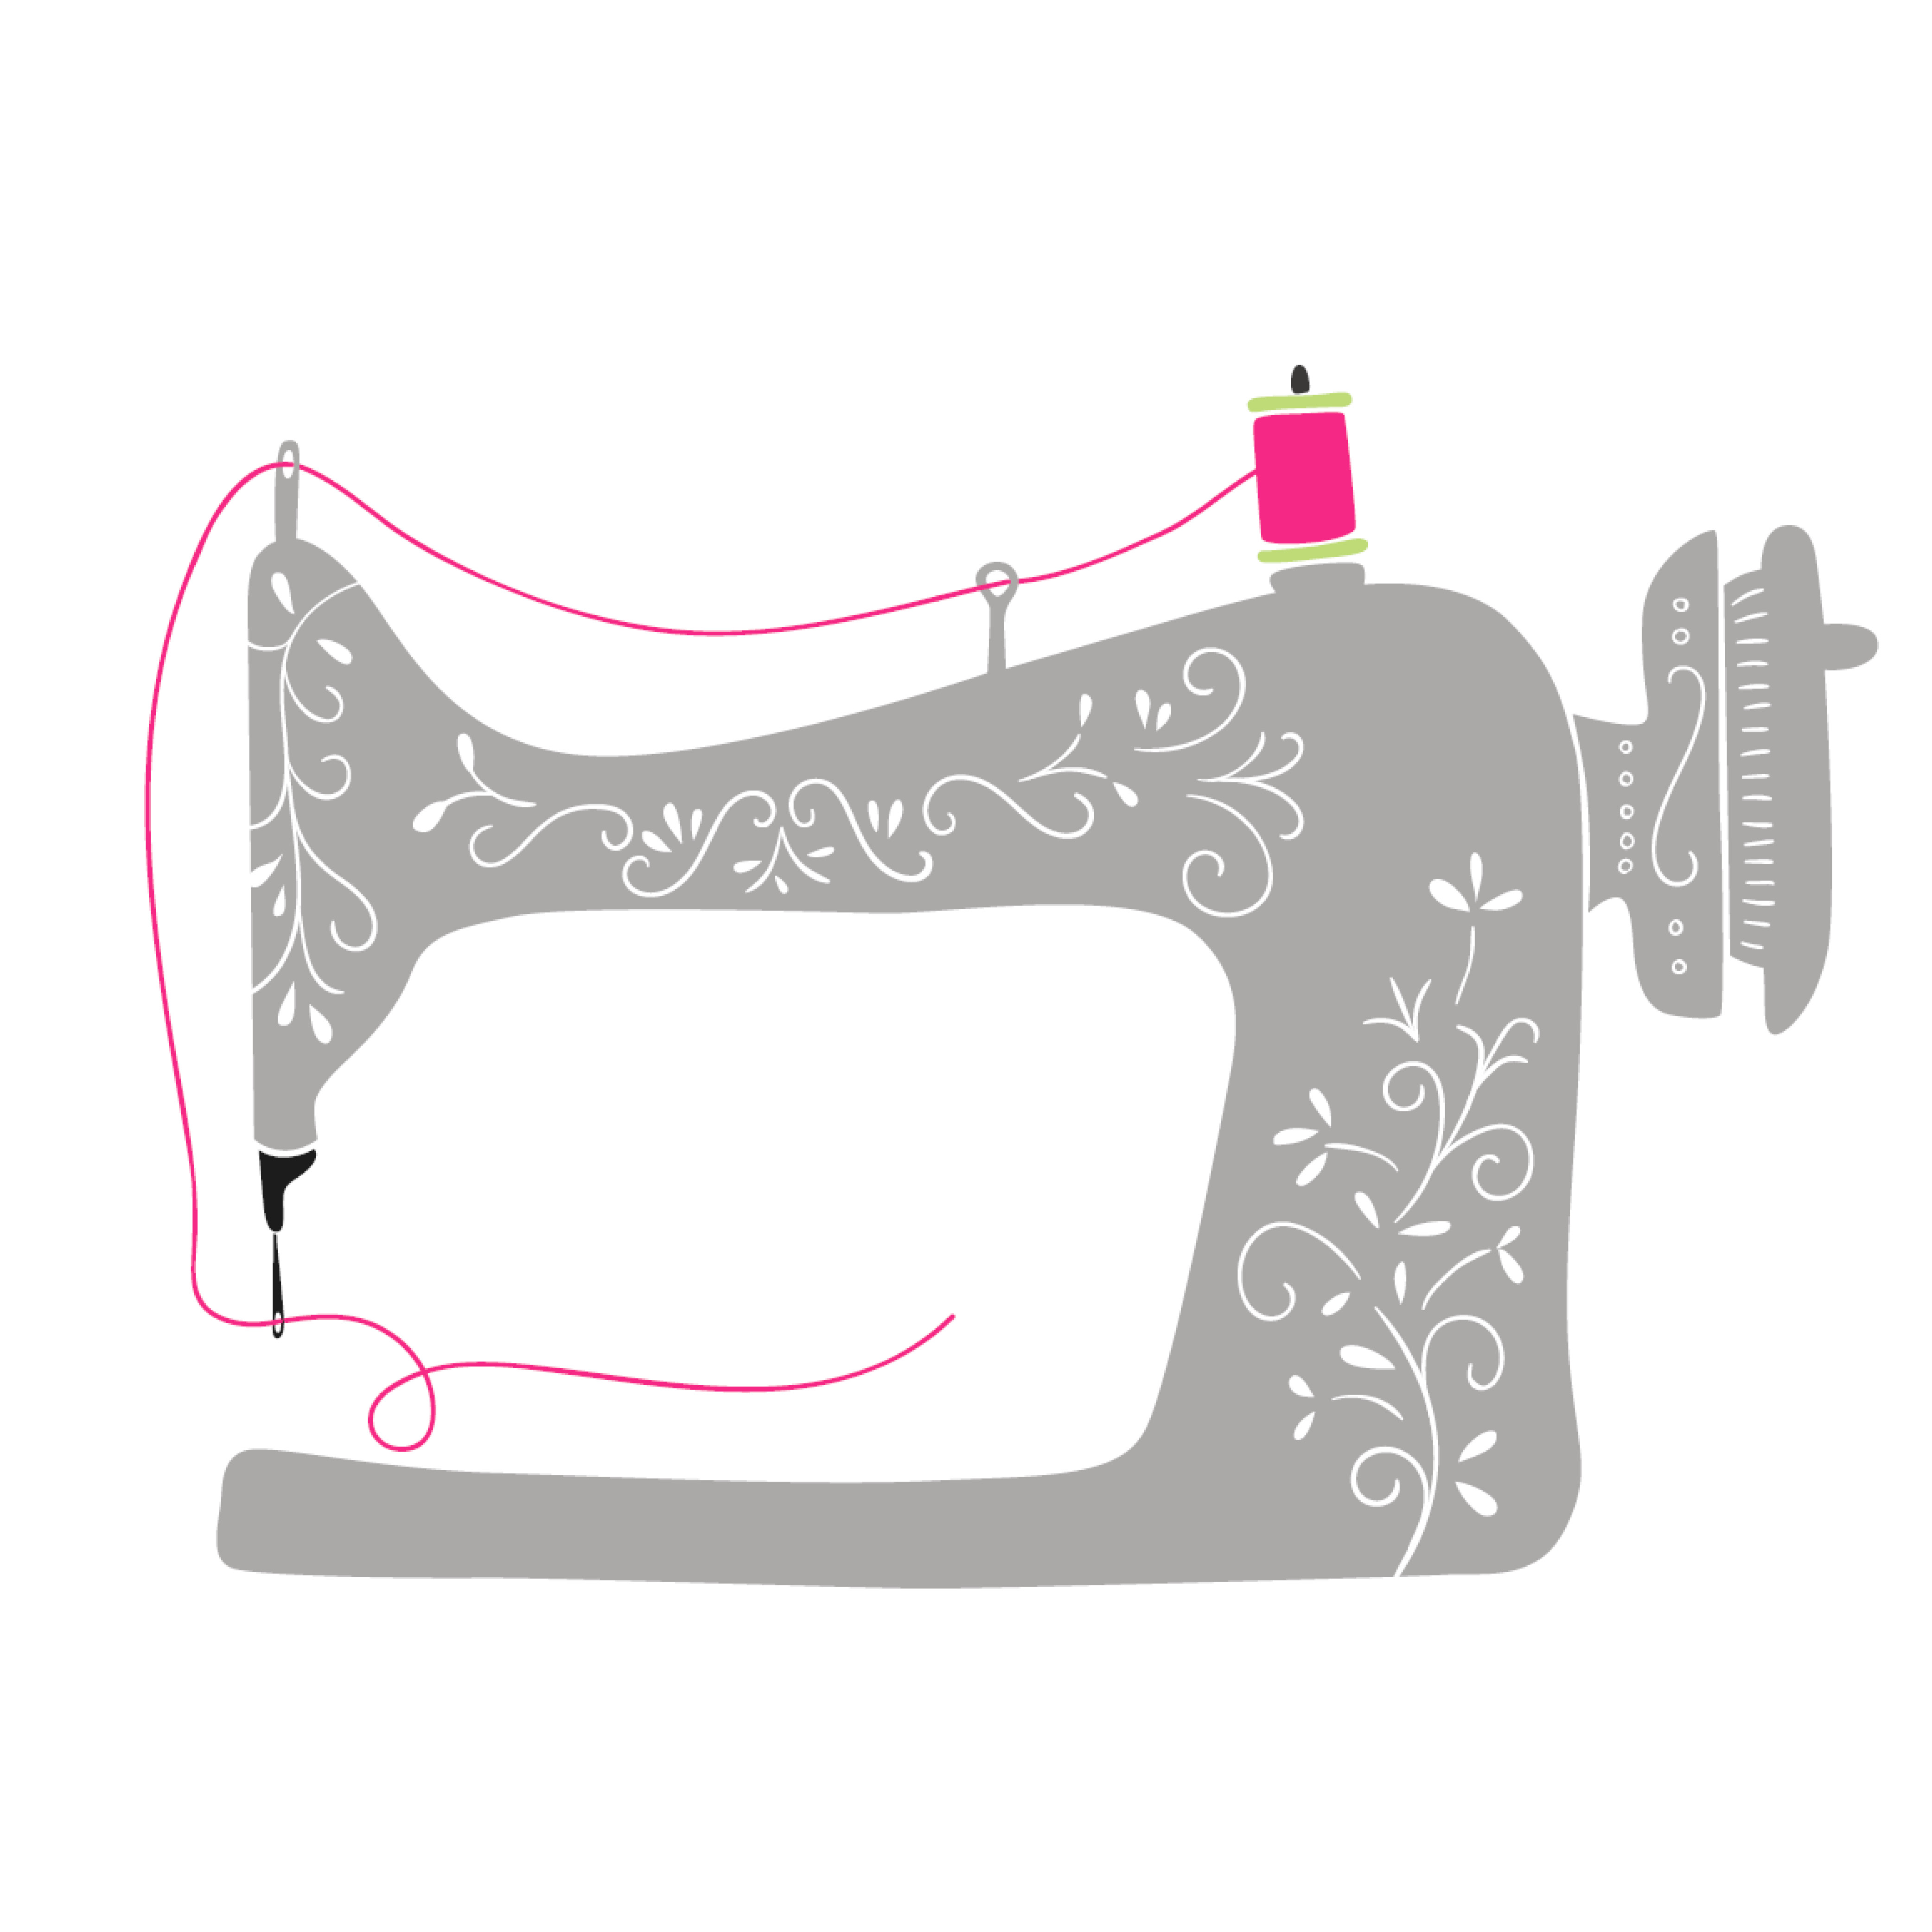 Decorative drawing of a sewing machine